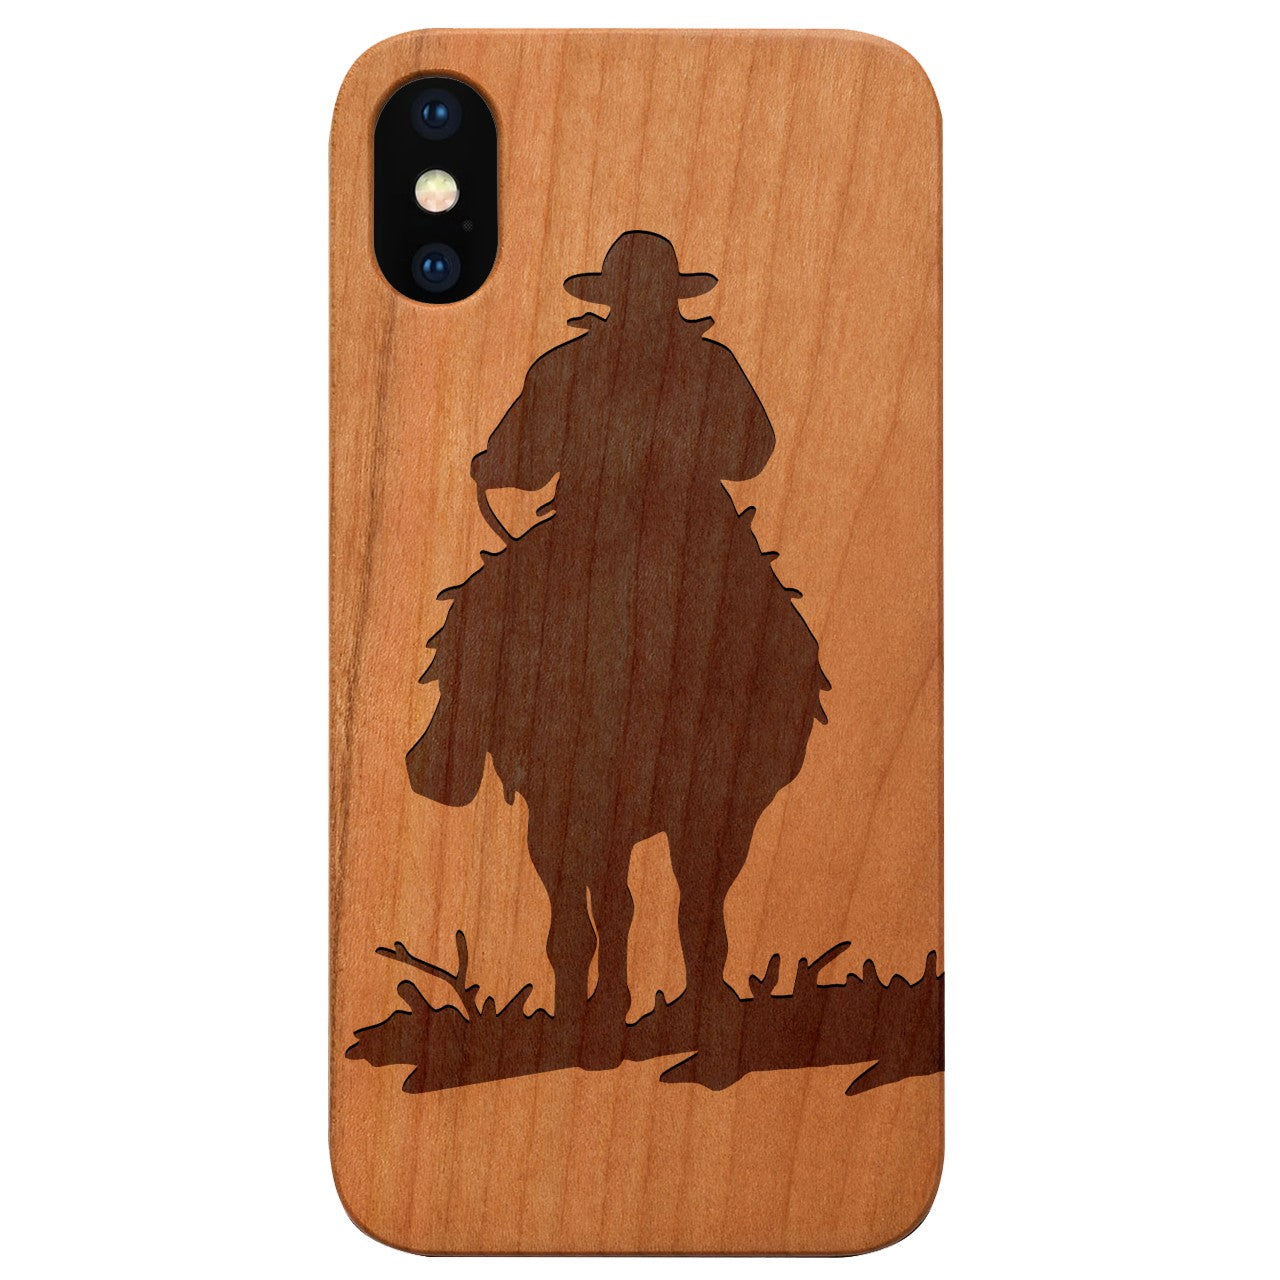  Cowboy 1 - Engraved - Wooden Phone Case - IPhone 13 Models